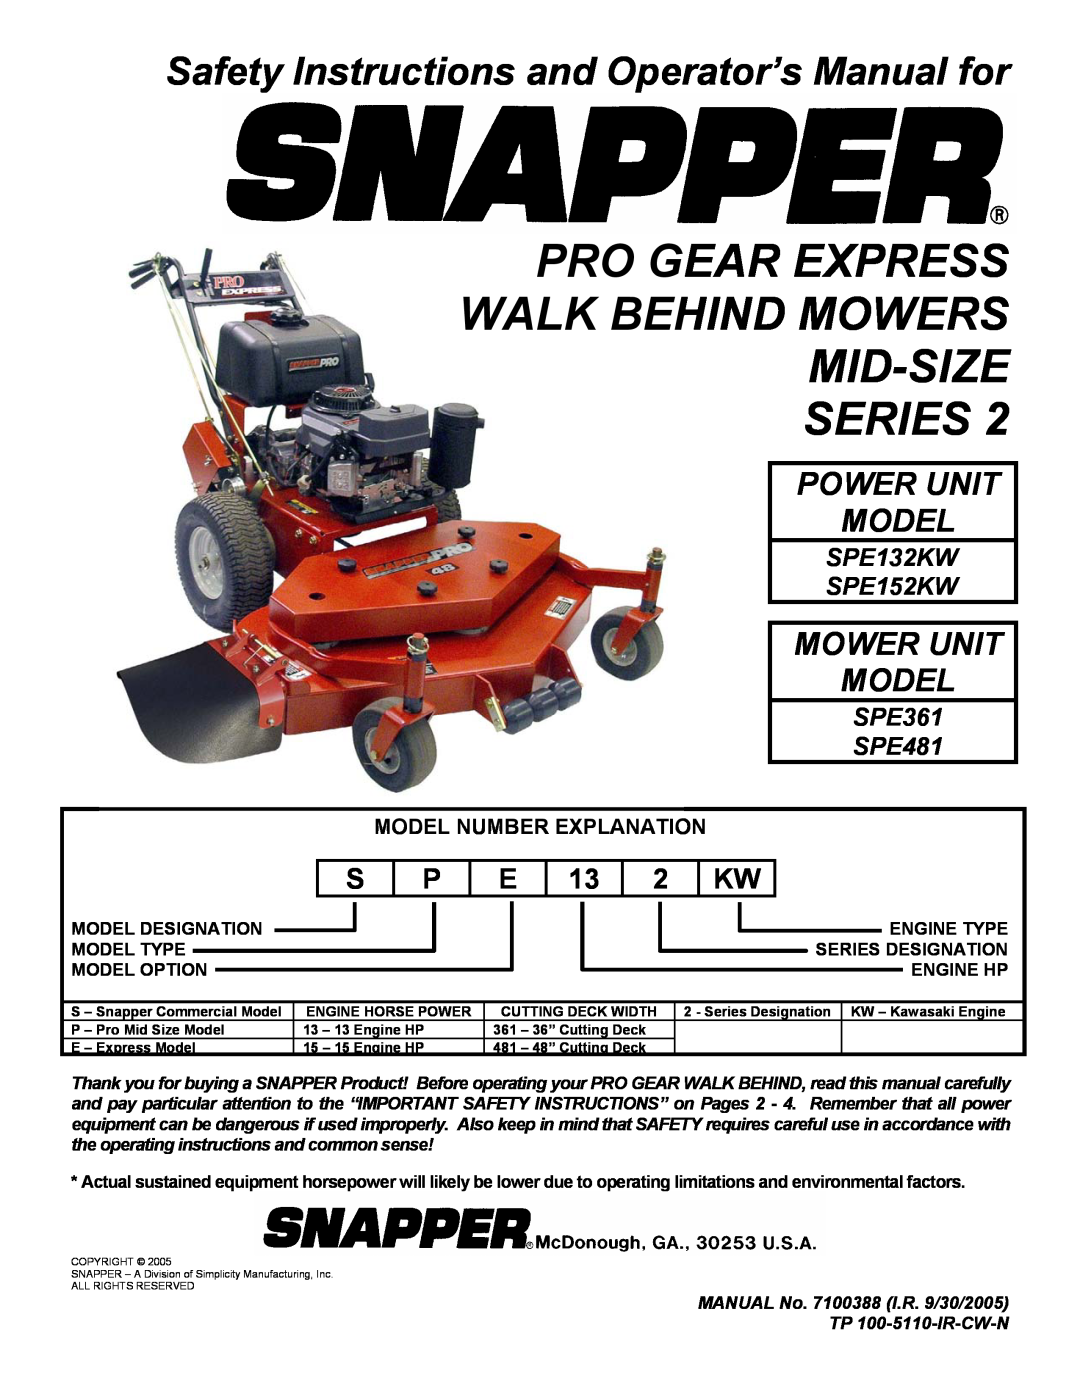 Snapper SPE152KW, SPE132KW, SPE361, SPE481 important safety instructions Pro Gear Express Walk Behind Mowers Mid-Size 